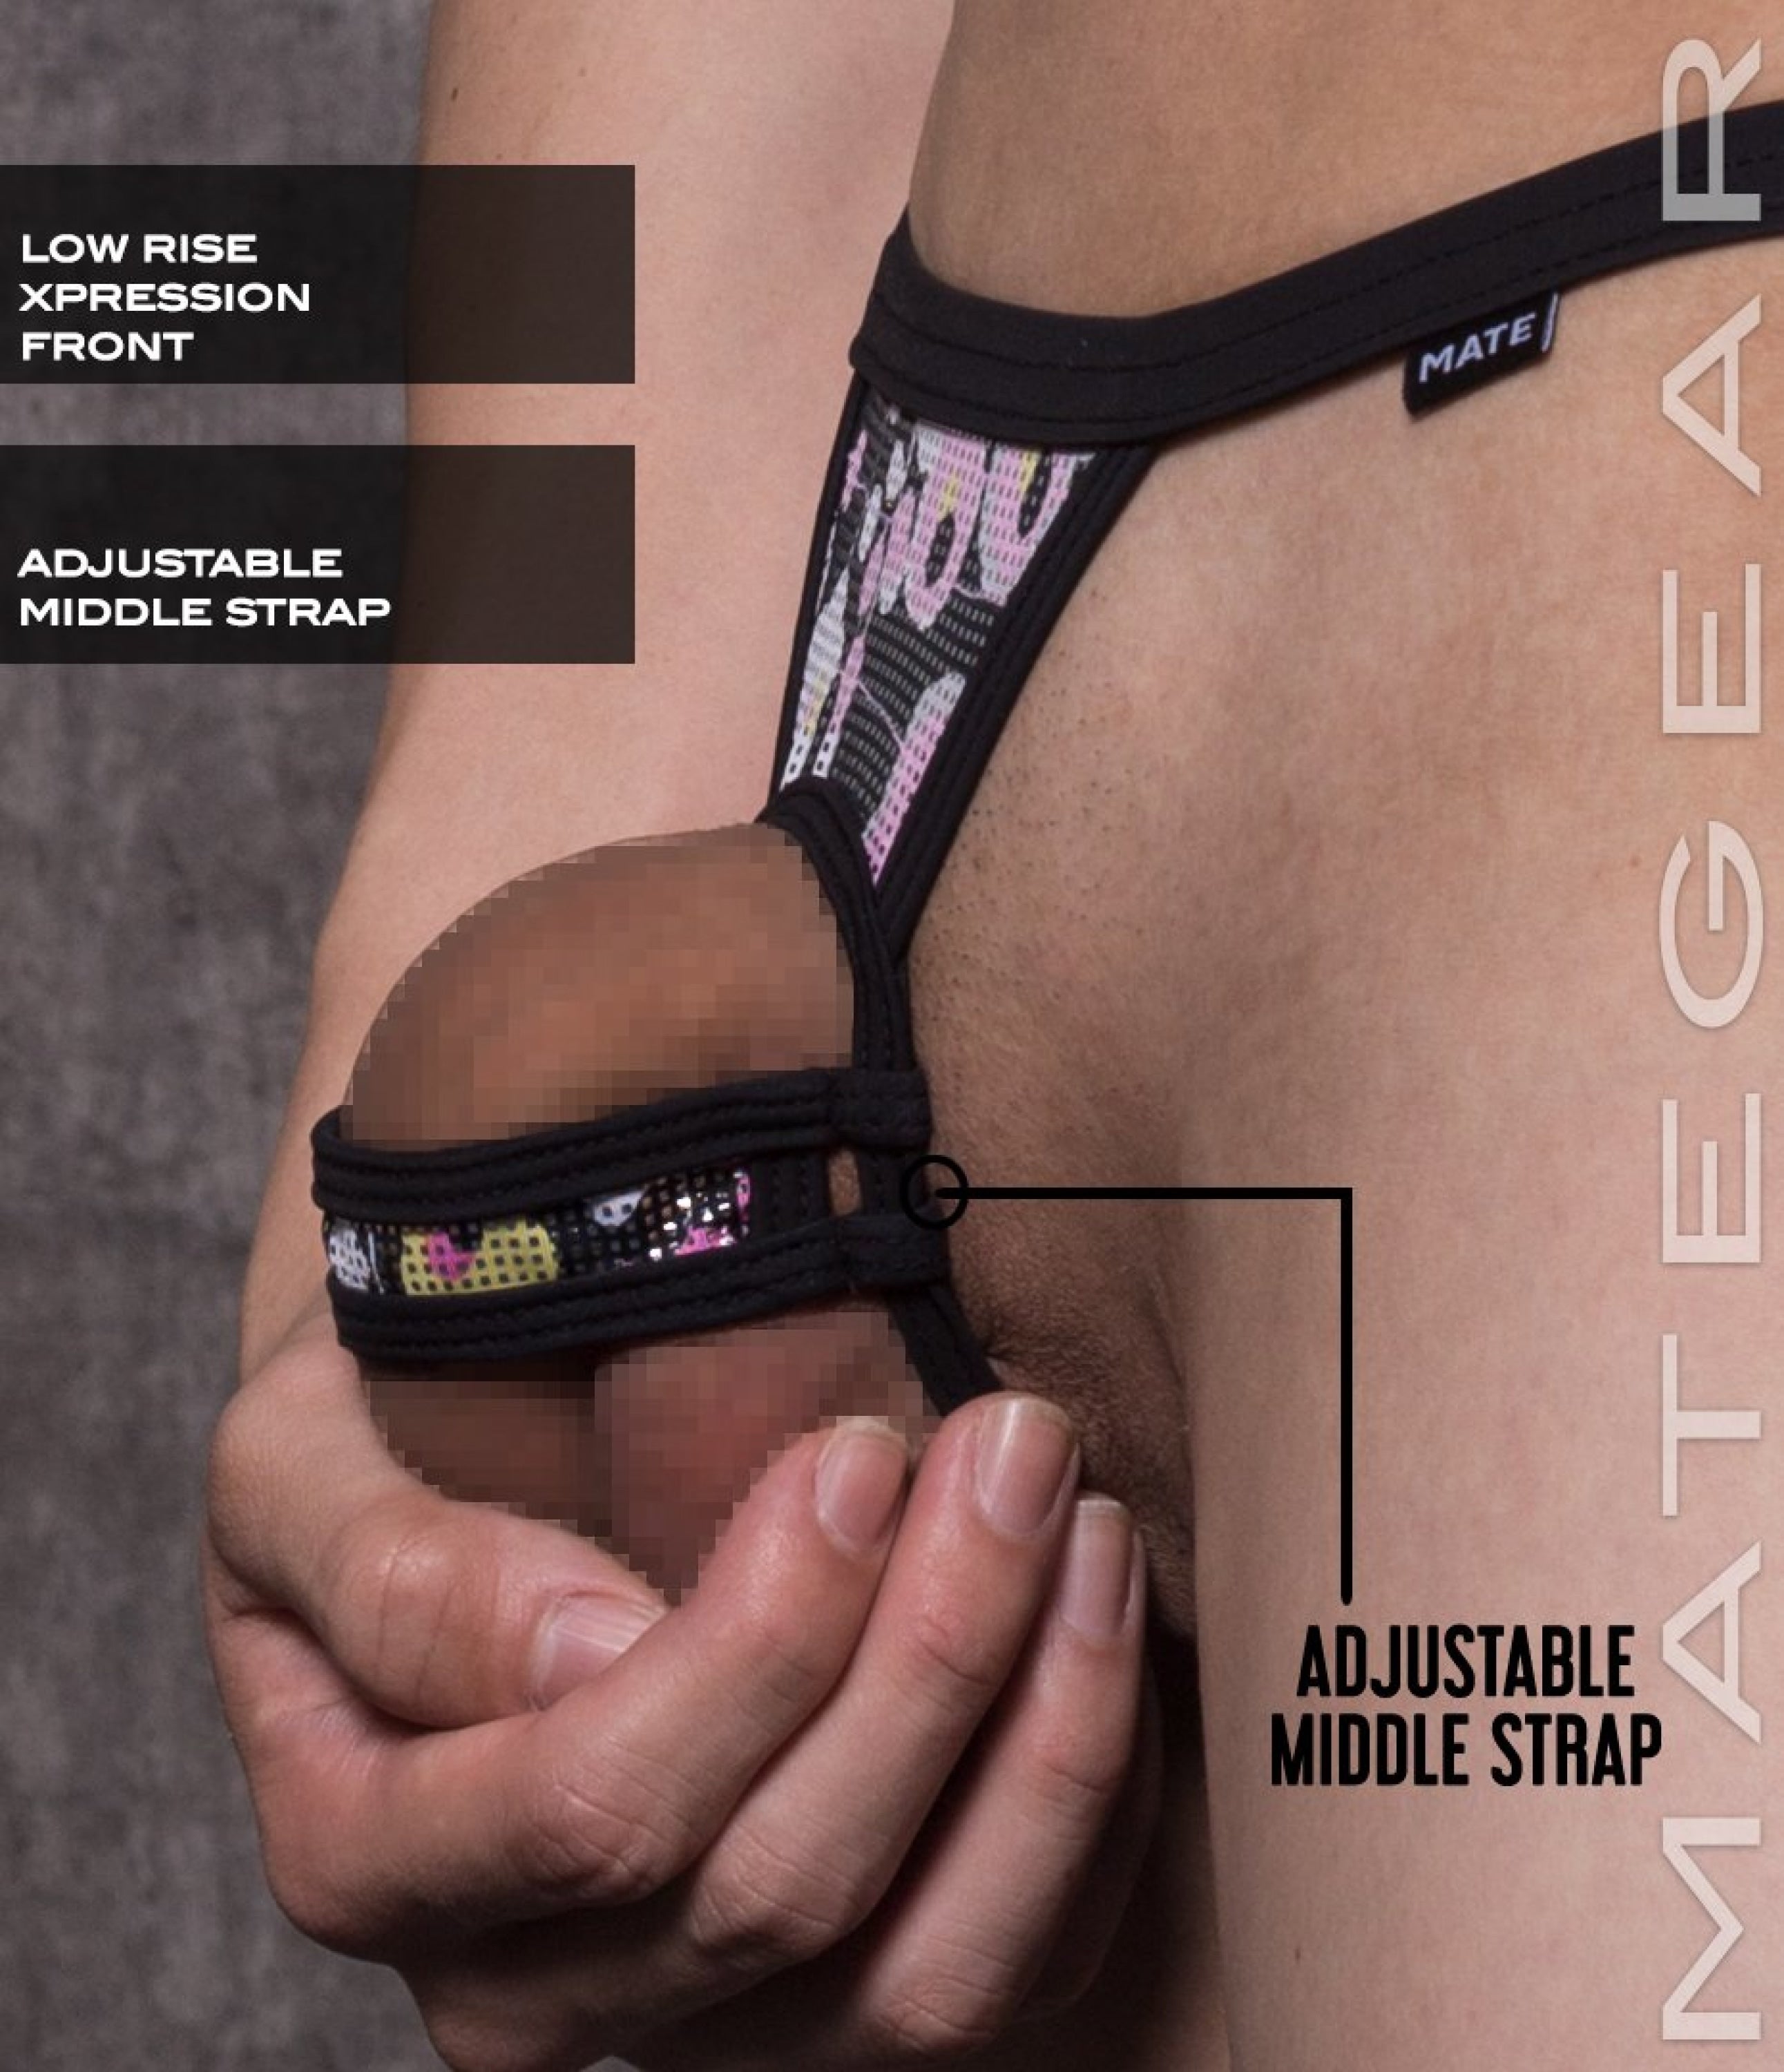 Sexy Mens Underwear Xpression Ultra G - Kae Jung (Adjustable Strap Front)